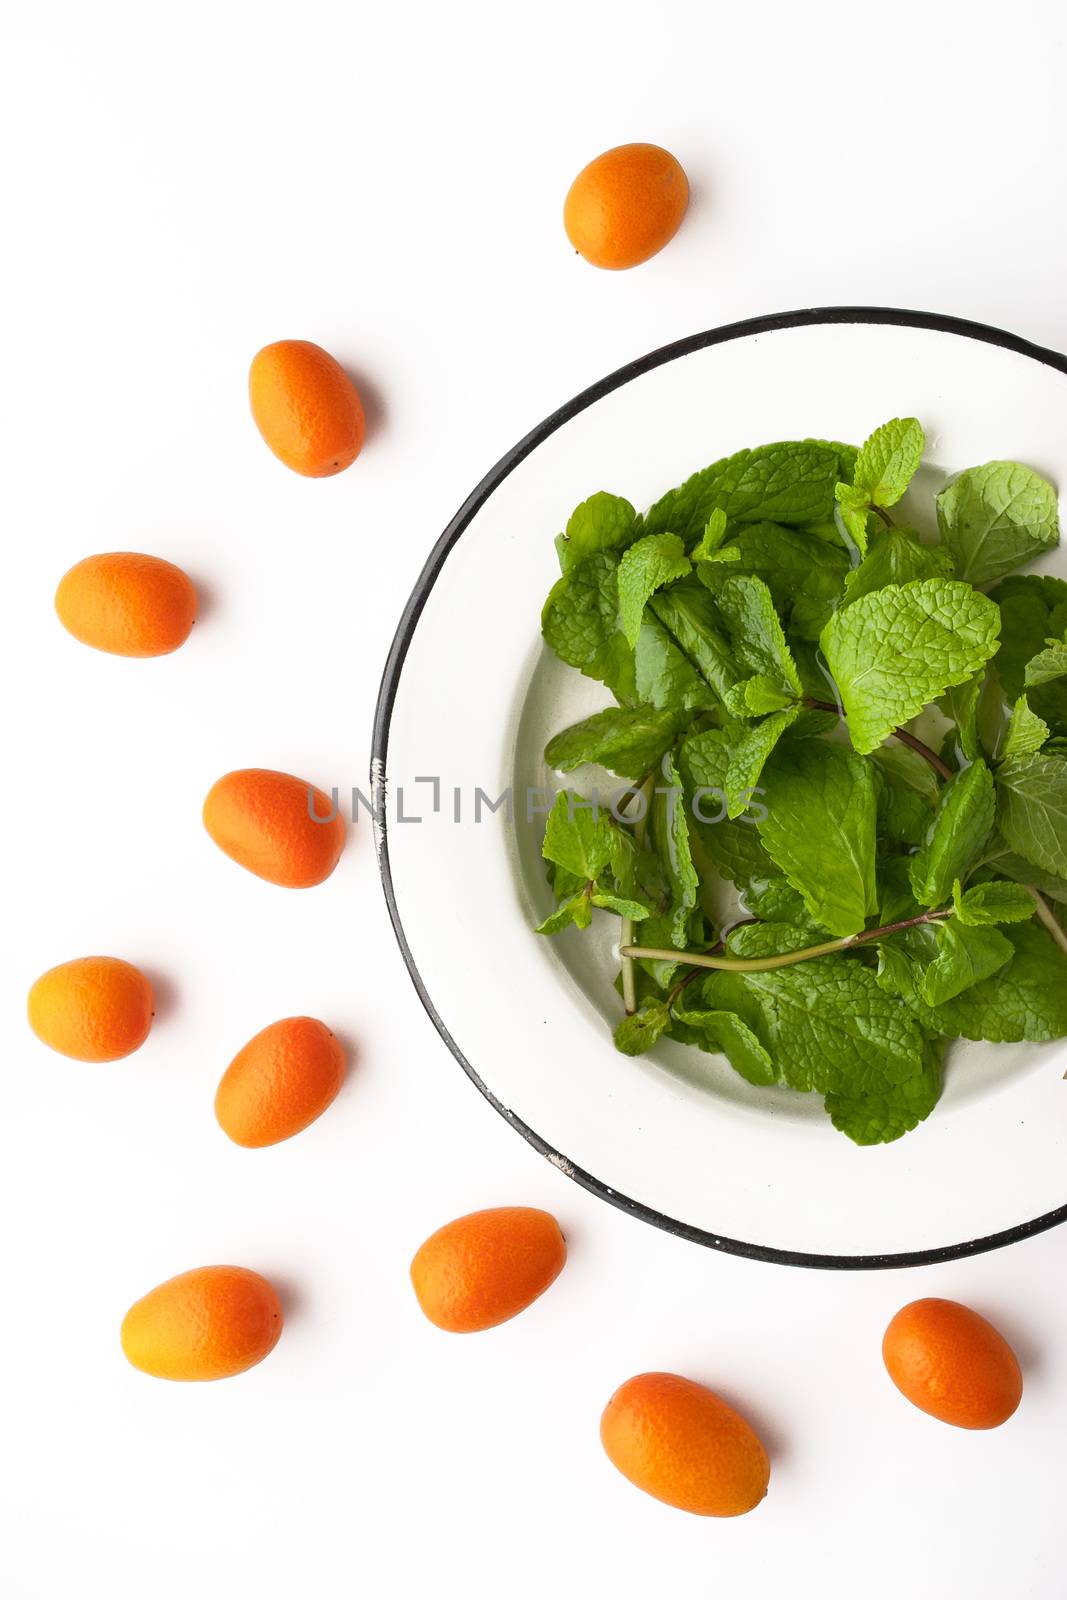 Mint with kumquat on the white background vertical